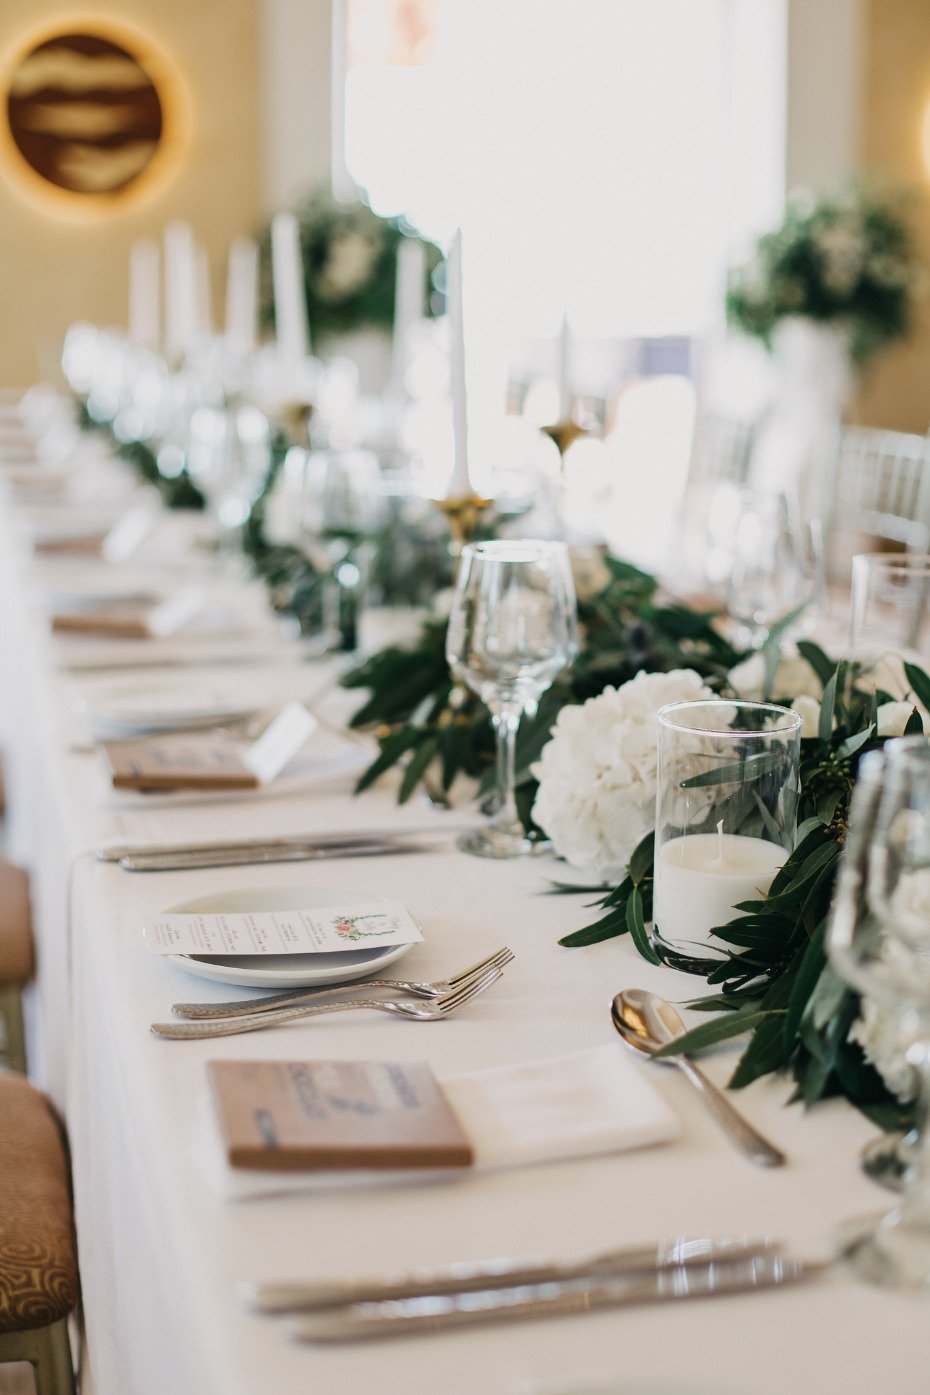 Reception table with greenery and white flowers